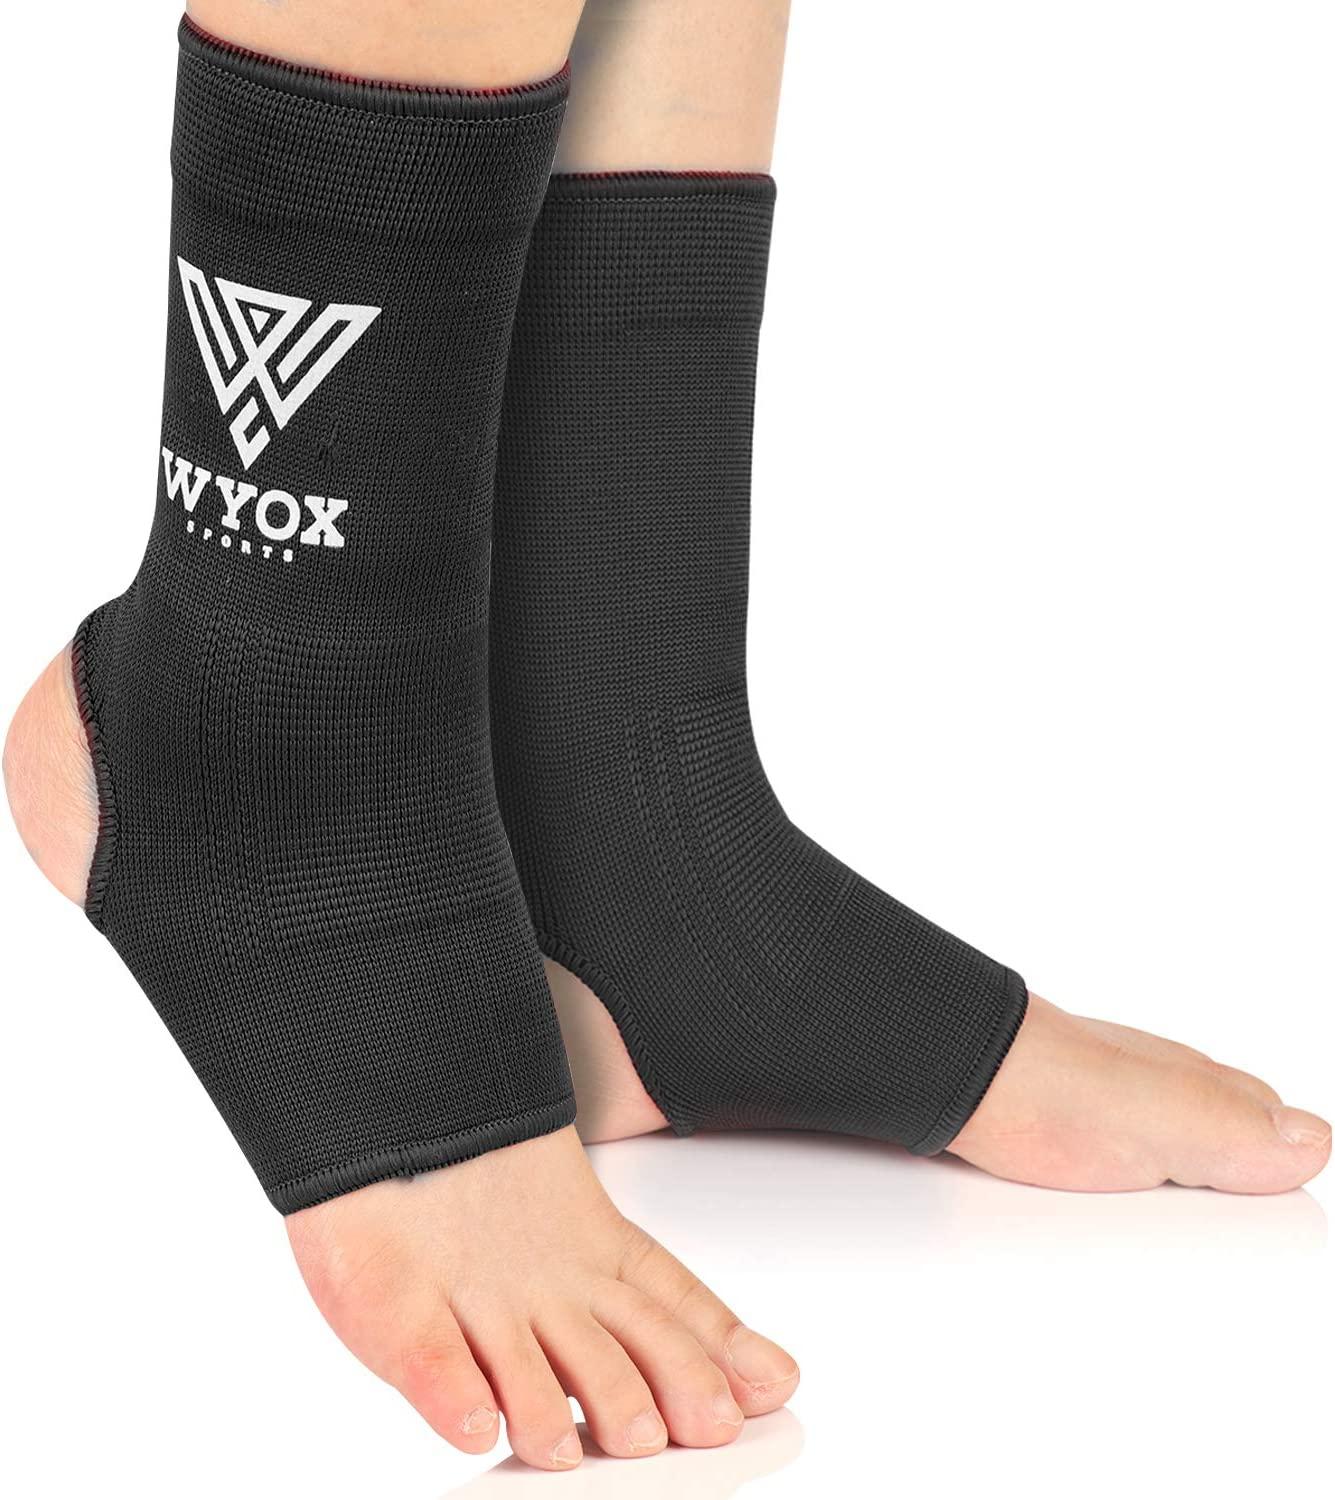 WYOX Ankle Wraps Support Boxing Gear for Men Women Muay Thai Ankle Support  Kickboxing Wraps Gym Ankle Support (Pair) Black S M (Women 4.0 - 6.5 Men  3.0 - 5.5)